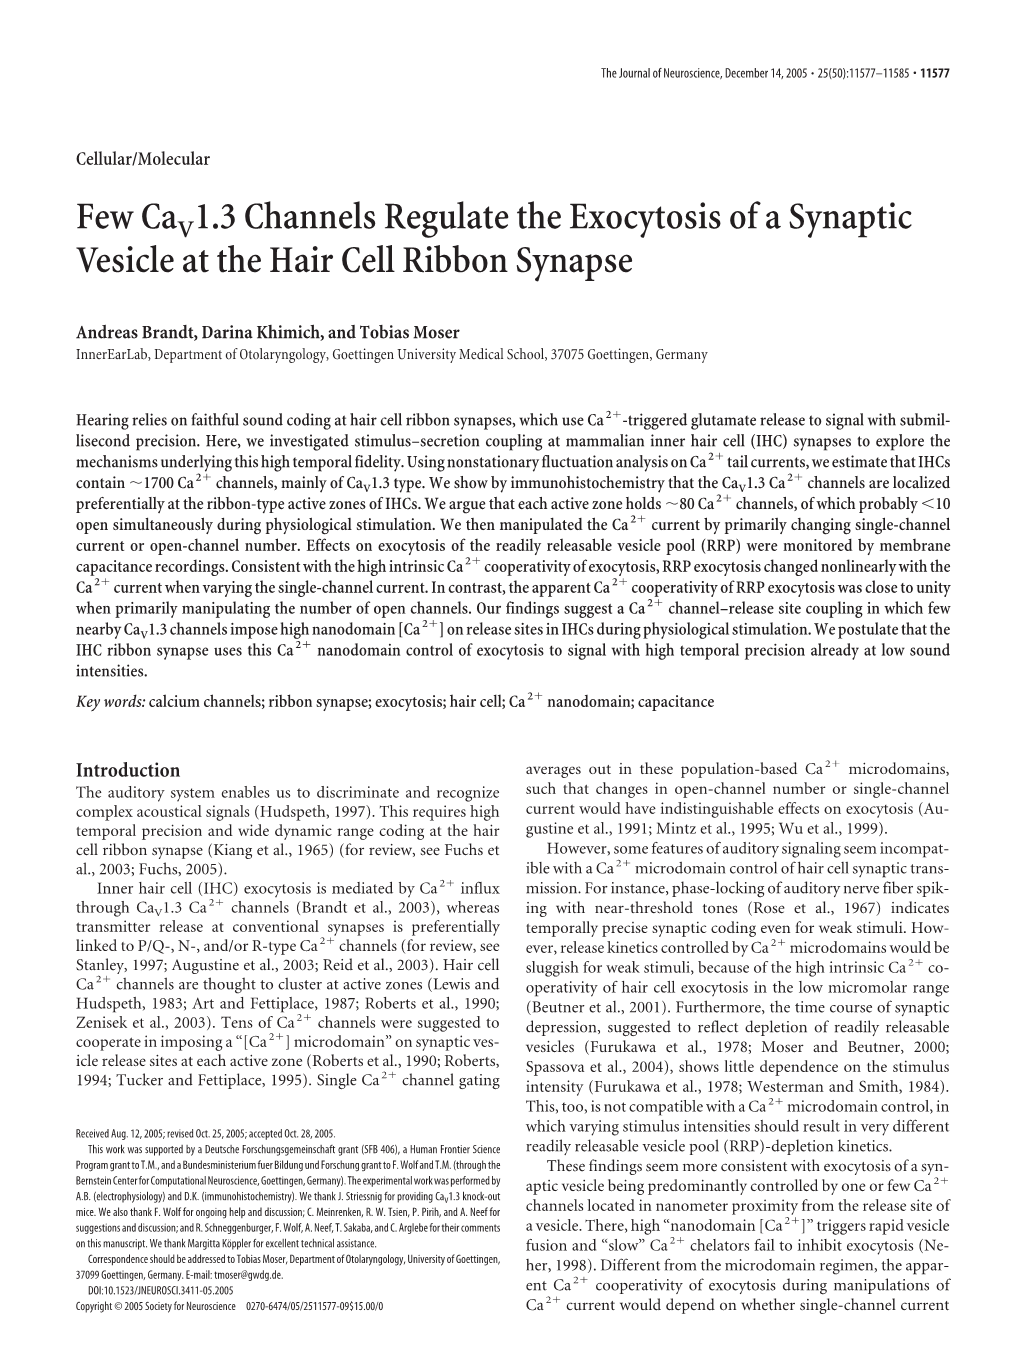 Few Cav 1.3 Channels Regulate the Exocytosis of a Synaptic Vesicle At